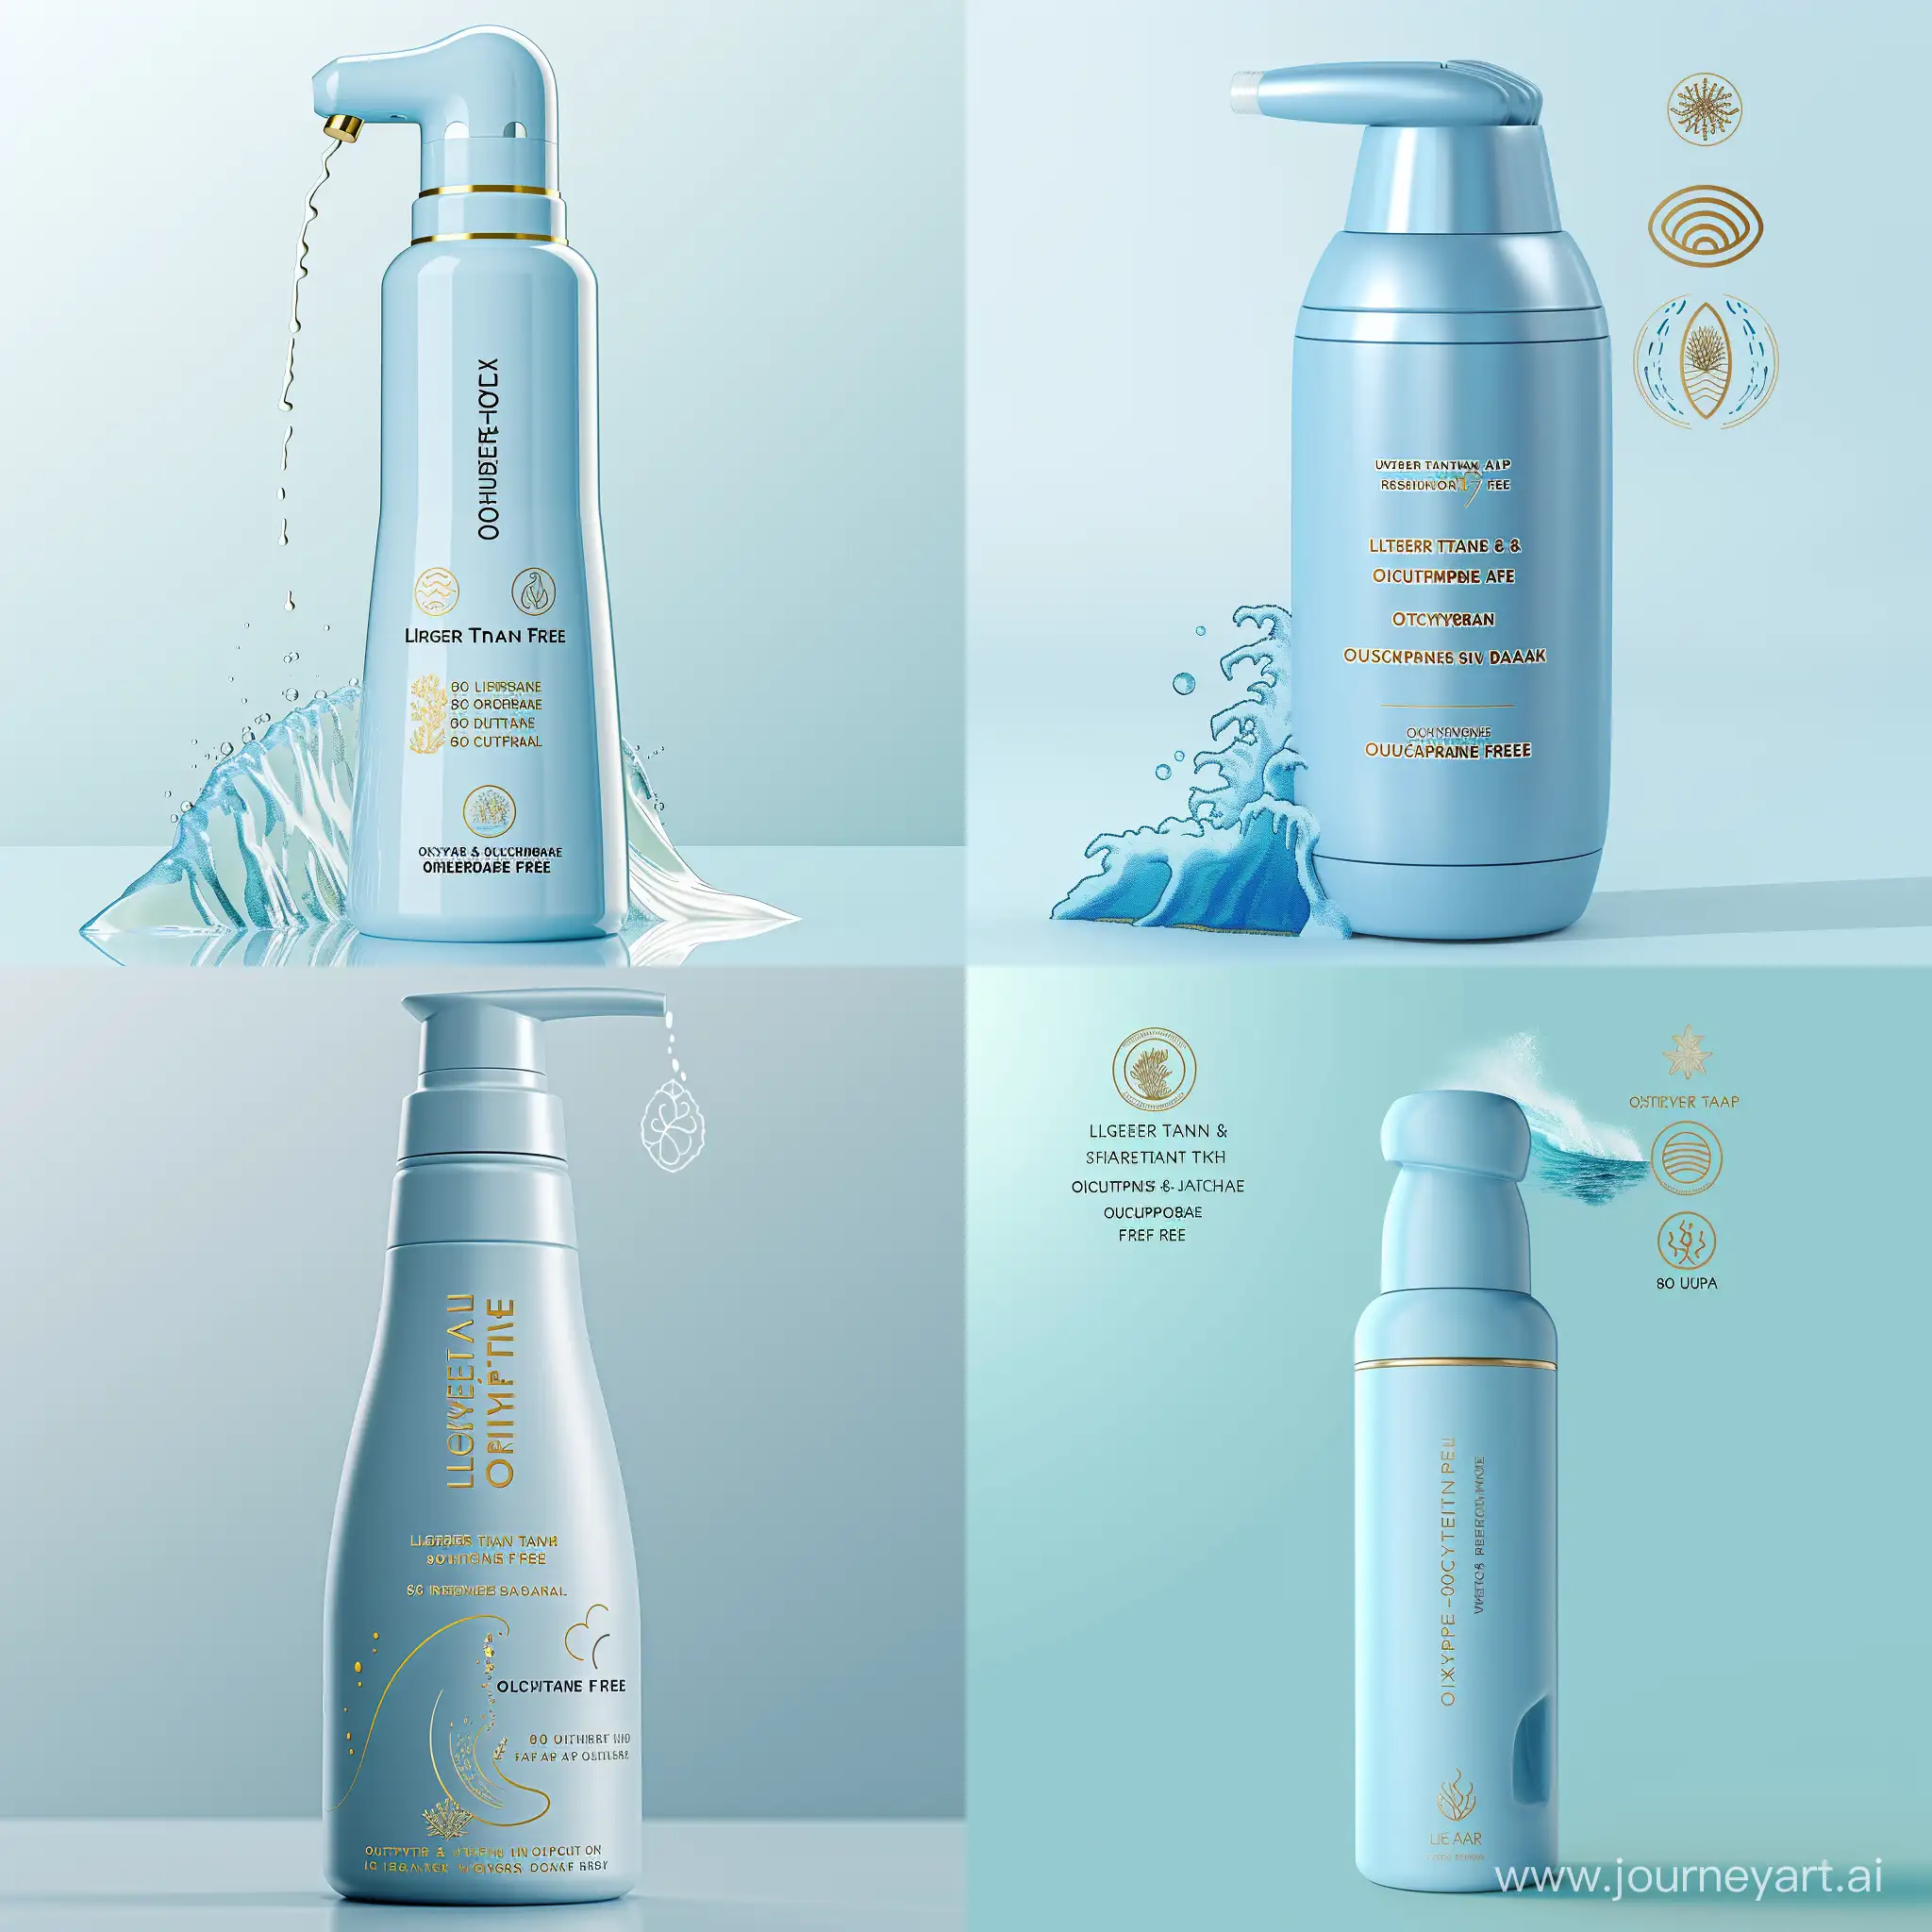 imagine a sleek, baby blue bottle. The bottle should have a dispenser. It should look luxury. The labels on the bottle  should be "Lighter-Than-Air" , "Water-Resistant (80 minutes)", "Oxybenzone & Octinoxate free."  I want it to be written in gold color. Additionally, include symbols representing the product being eco-friendly, cruelty-free, and vegan attributes. Also add a small image of a wave and a coral reef